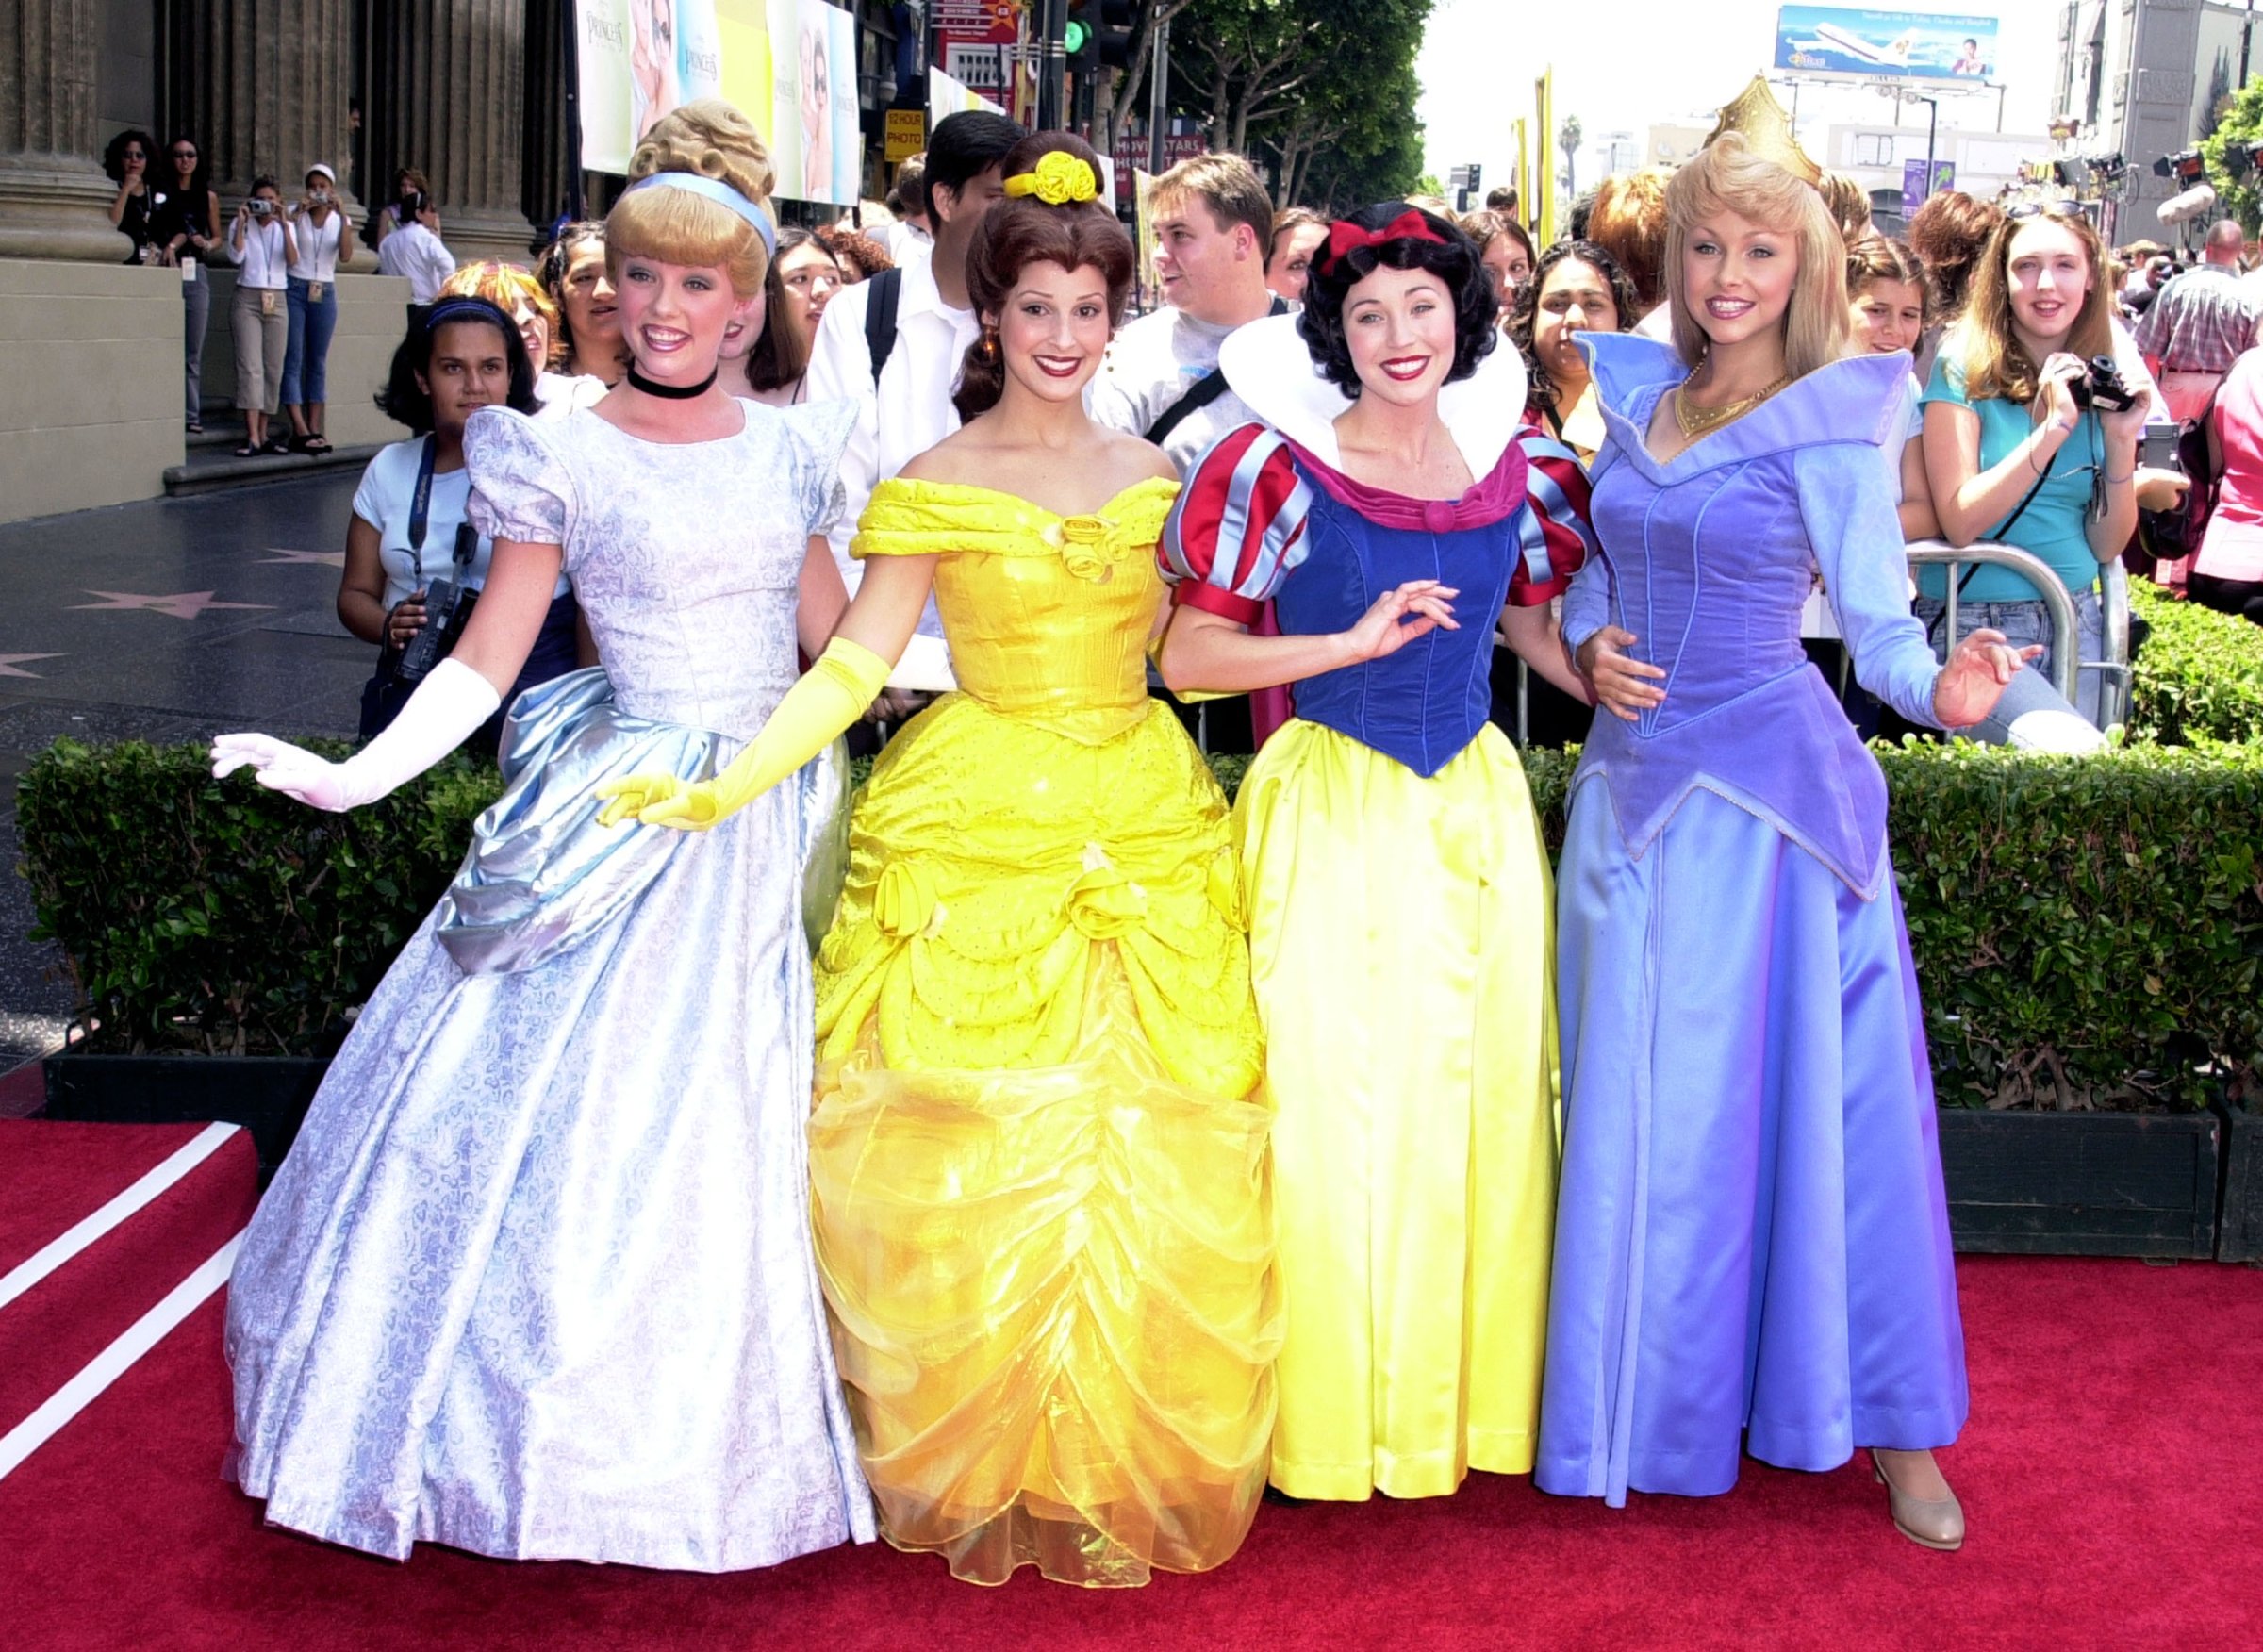 Disney Characters during The Princess Diaries Premiere at El Capitan Theatre in Hollywood.